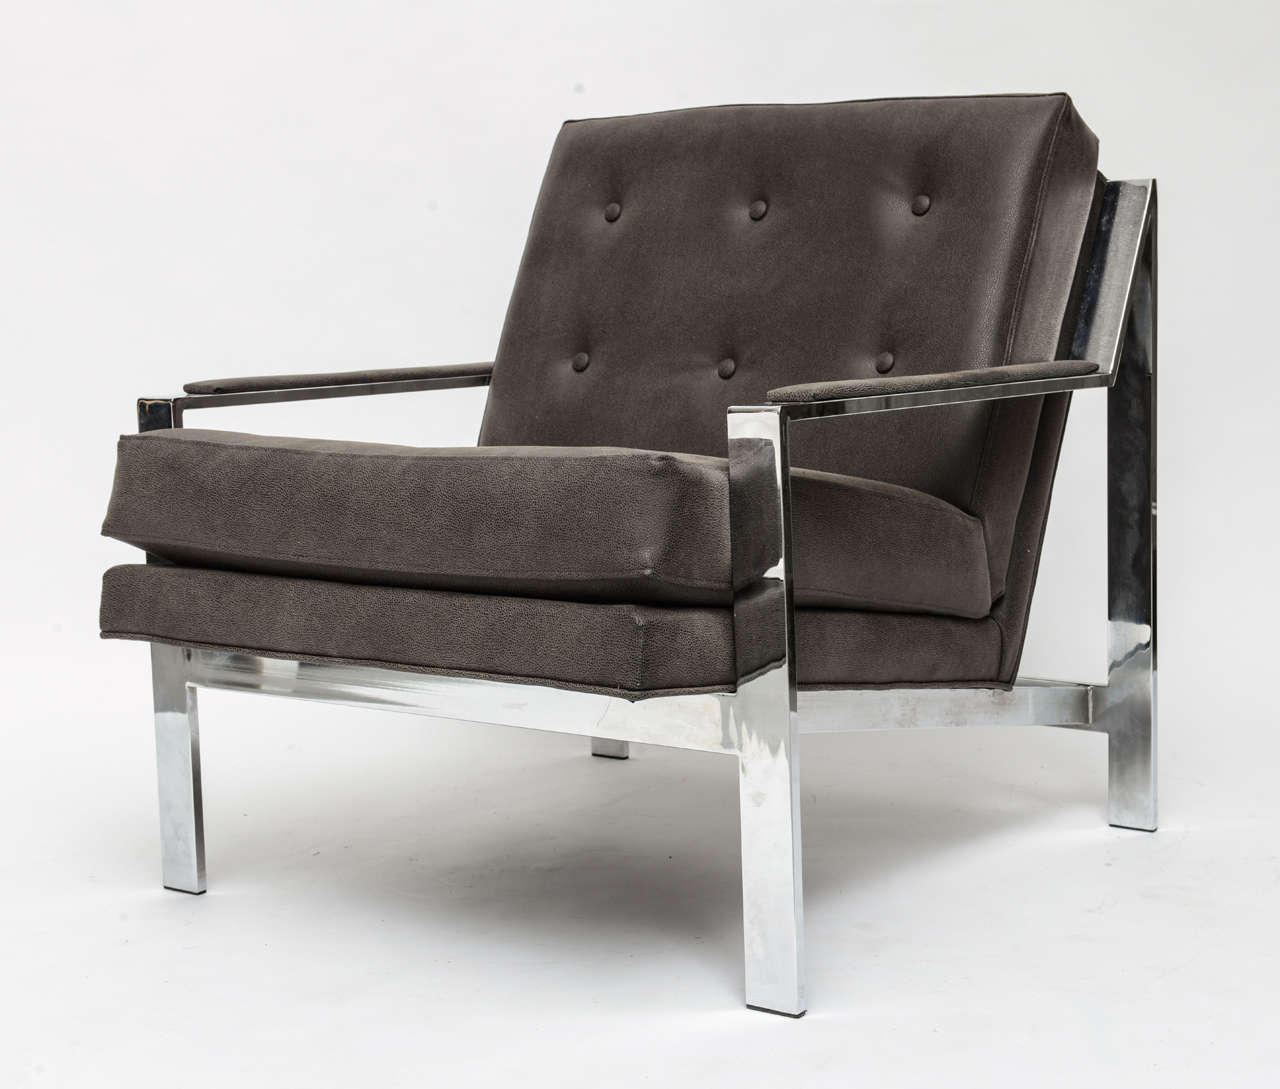 Chrome lounge chair by Cy Mann with new 